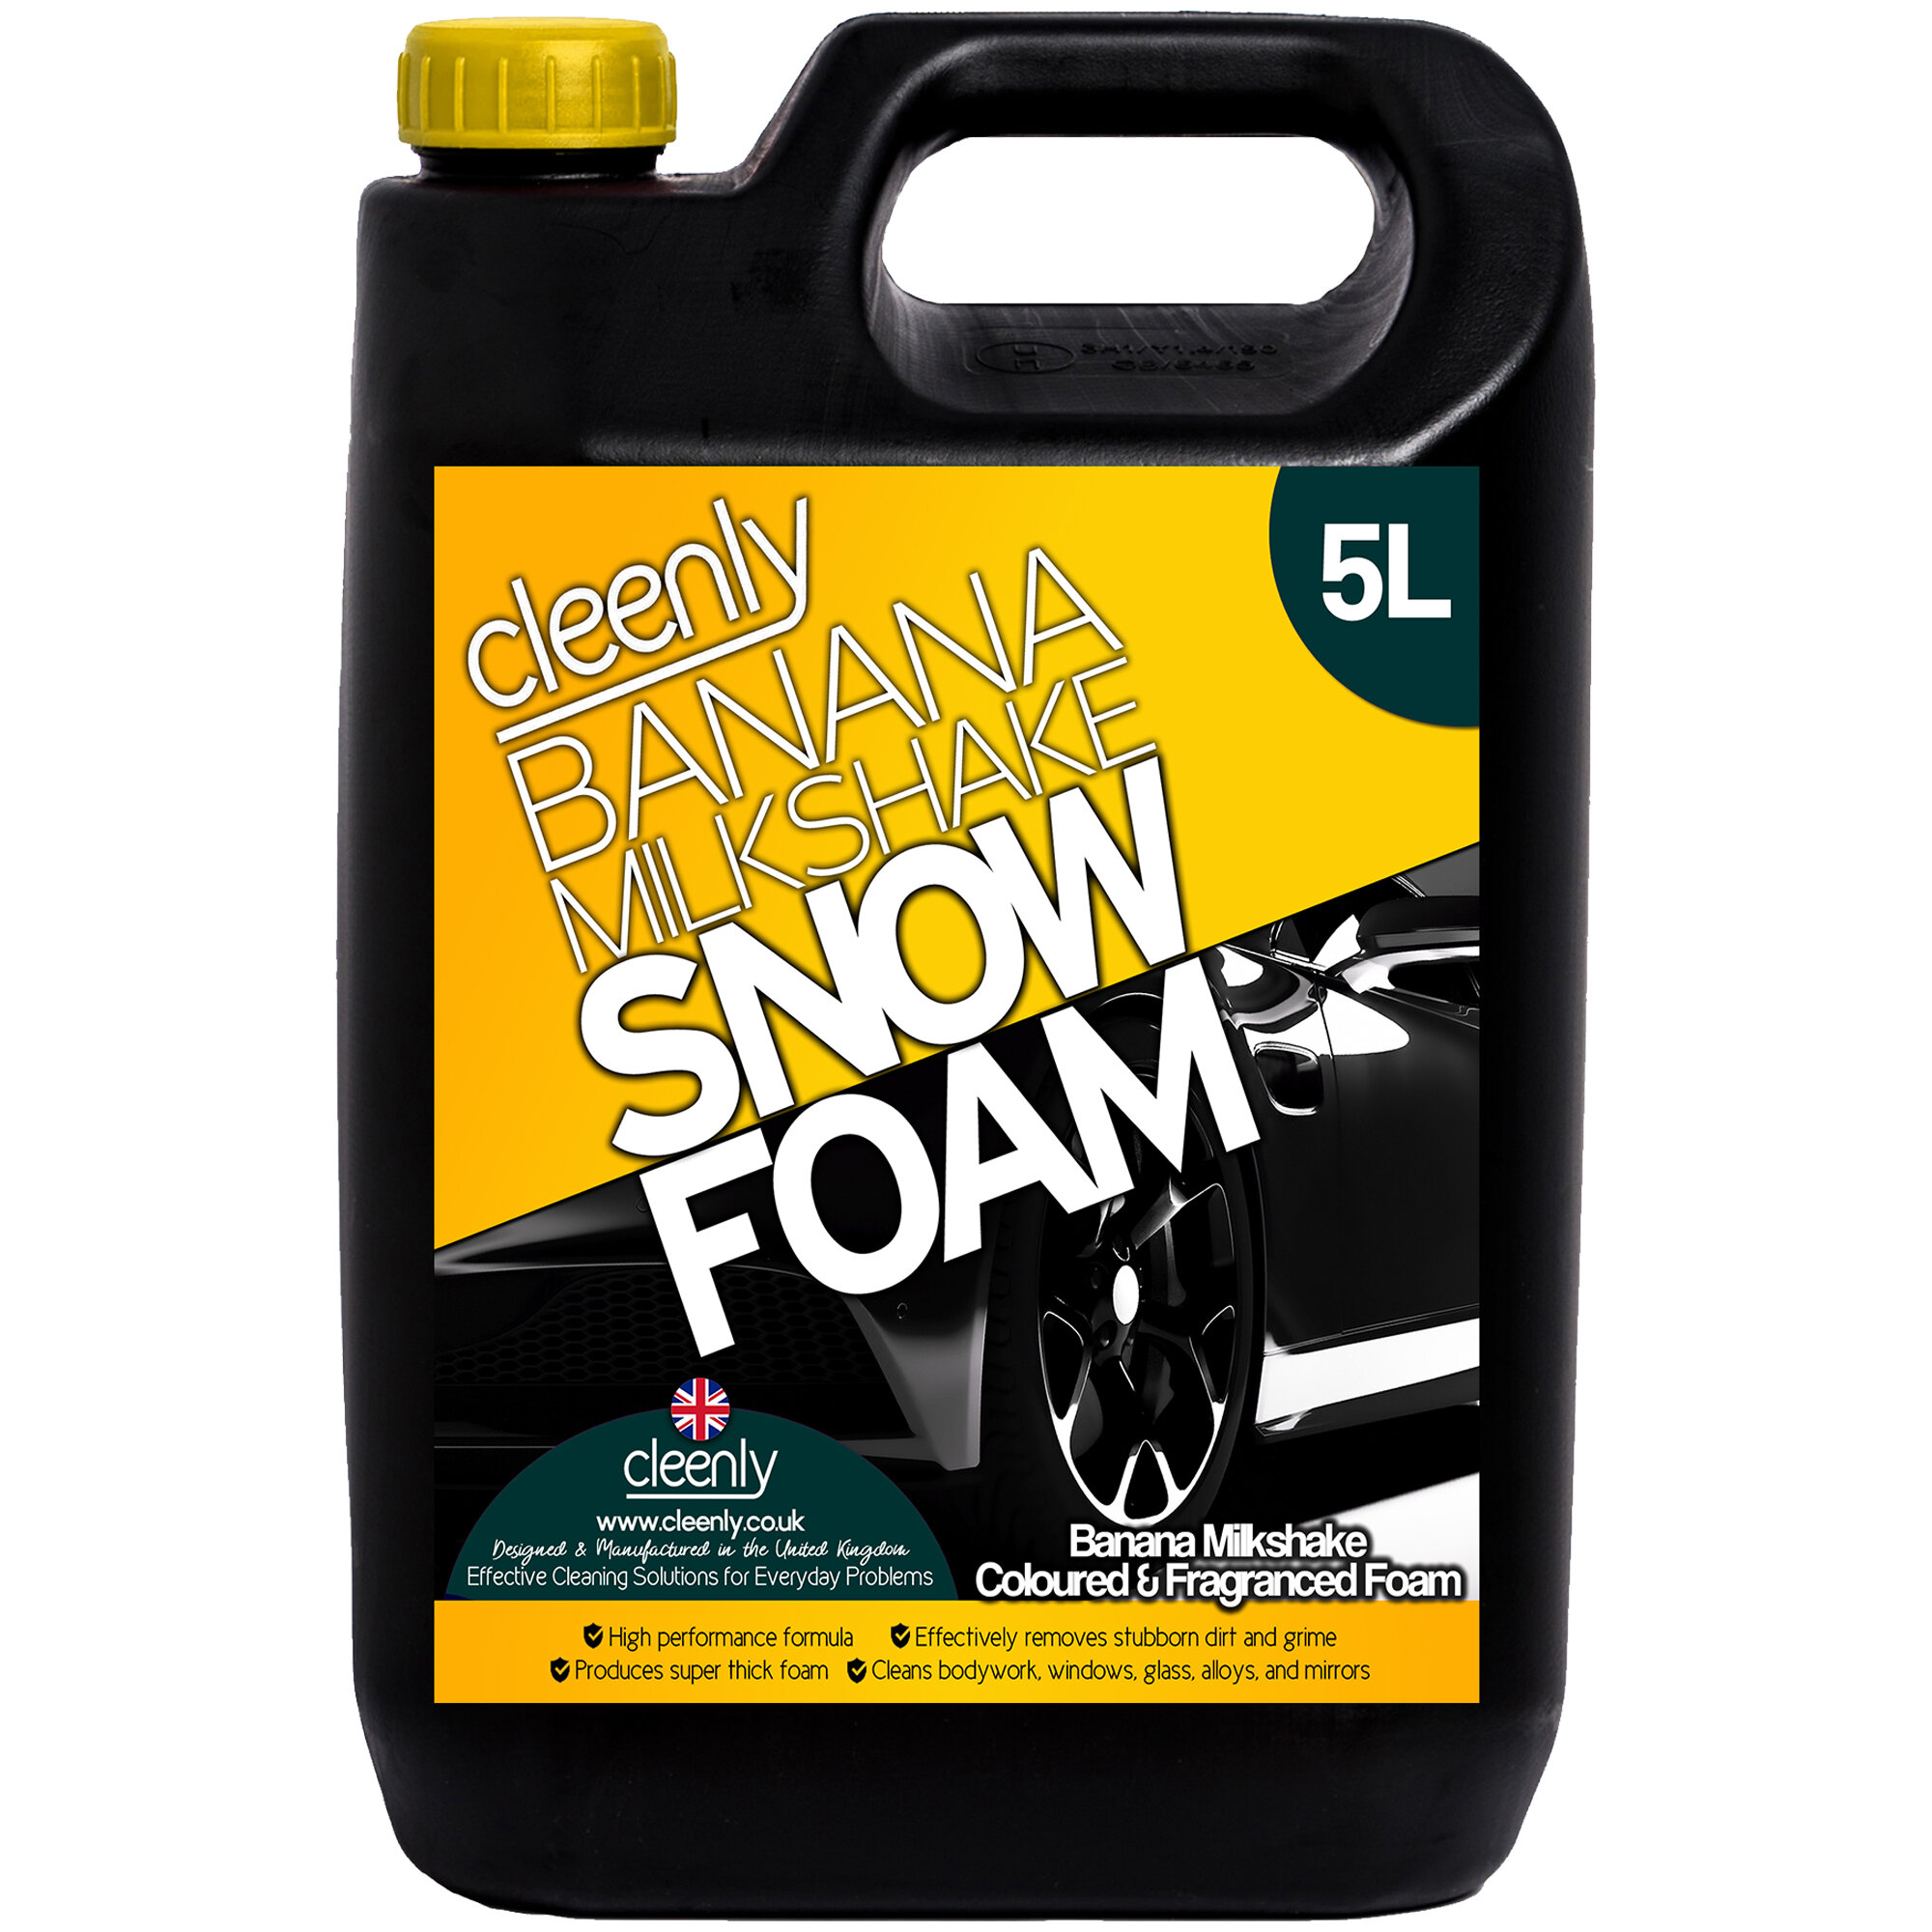 Cleenly Fragranced Coloured Snow Foam